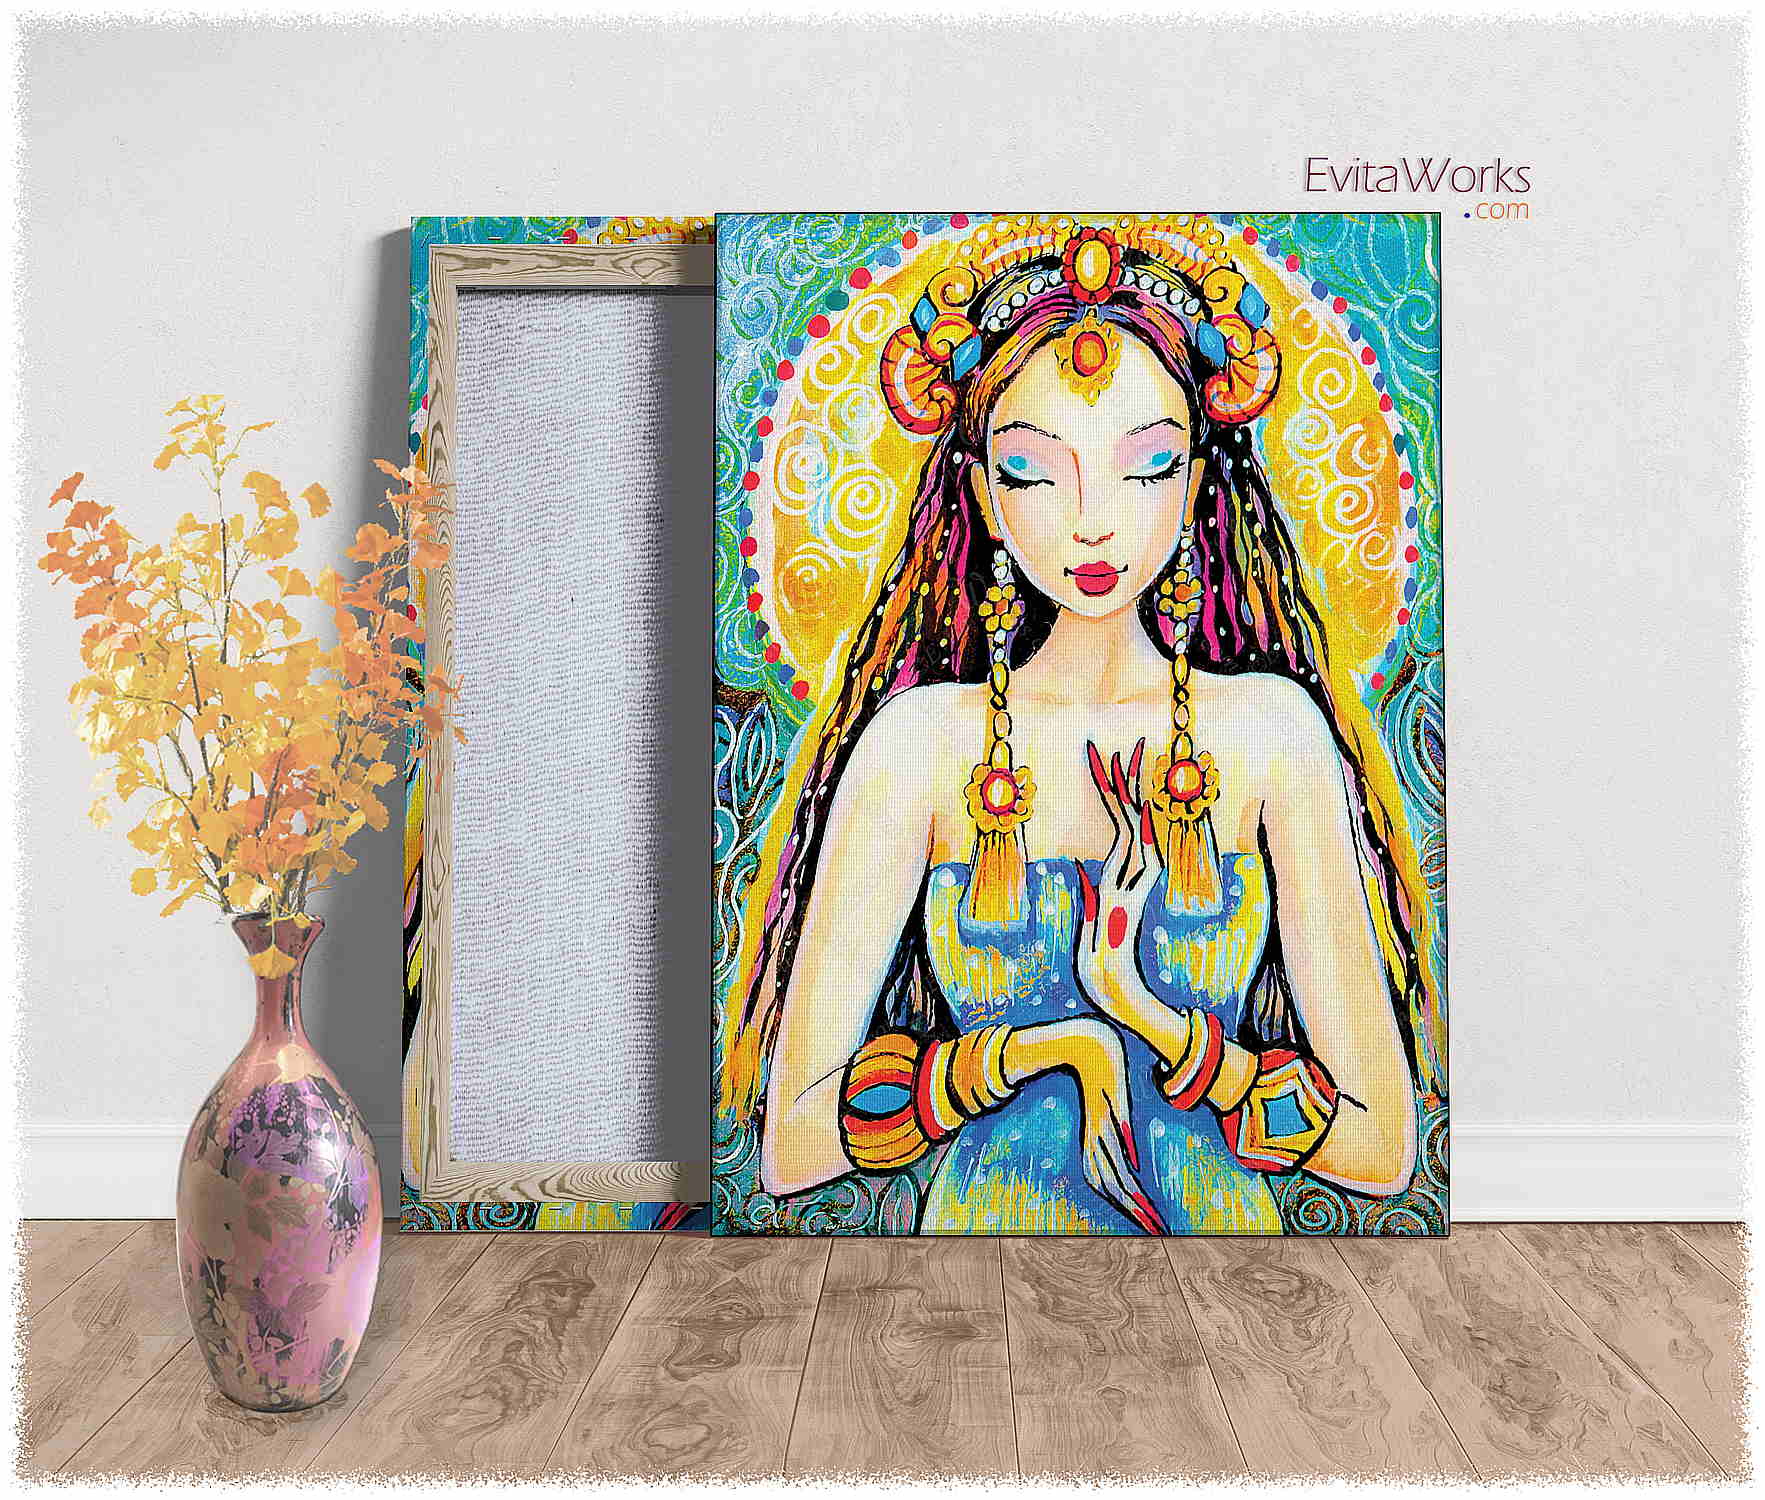 Hit to learn about "Quan Yin, Goddess of Mercy and Compassion" on canvases